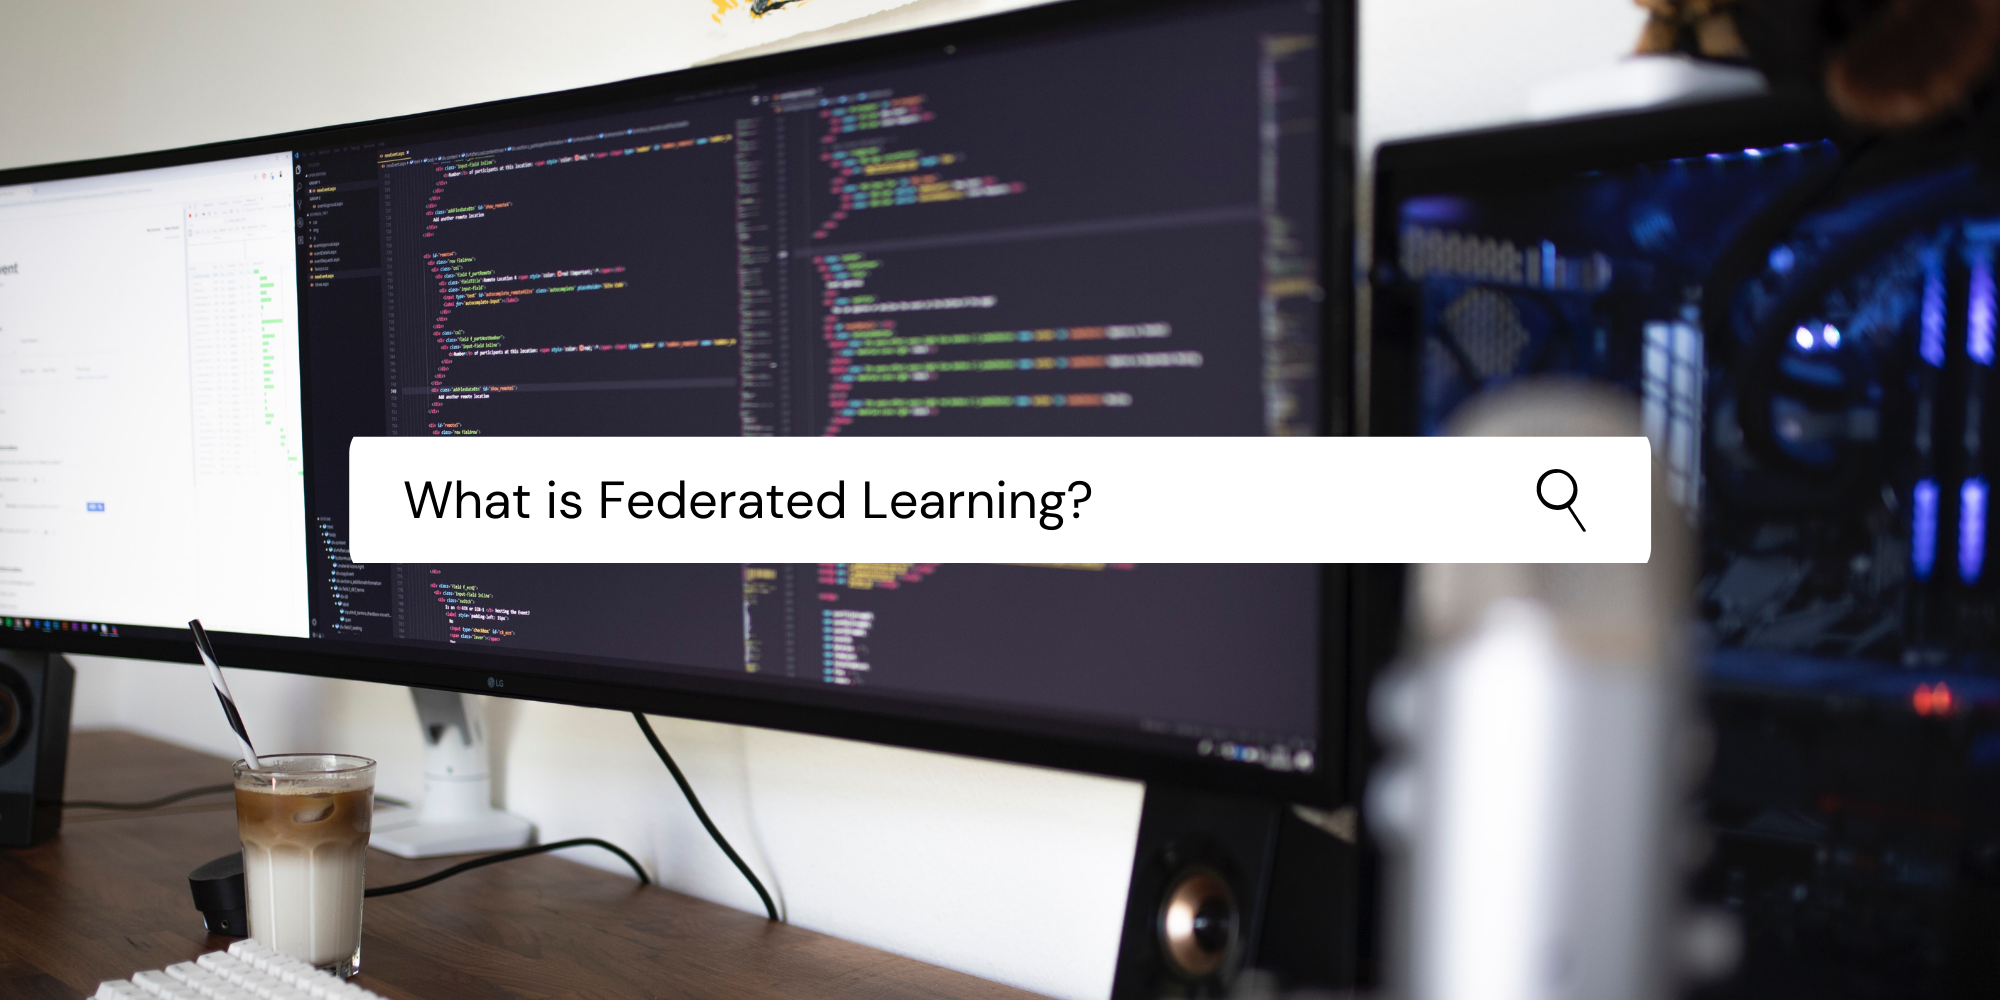 An Introduction to Federated Learning